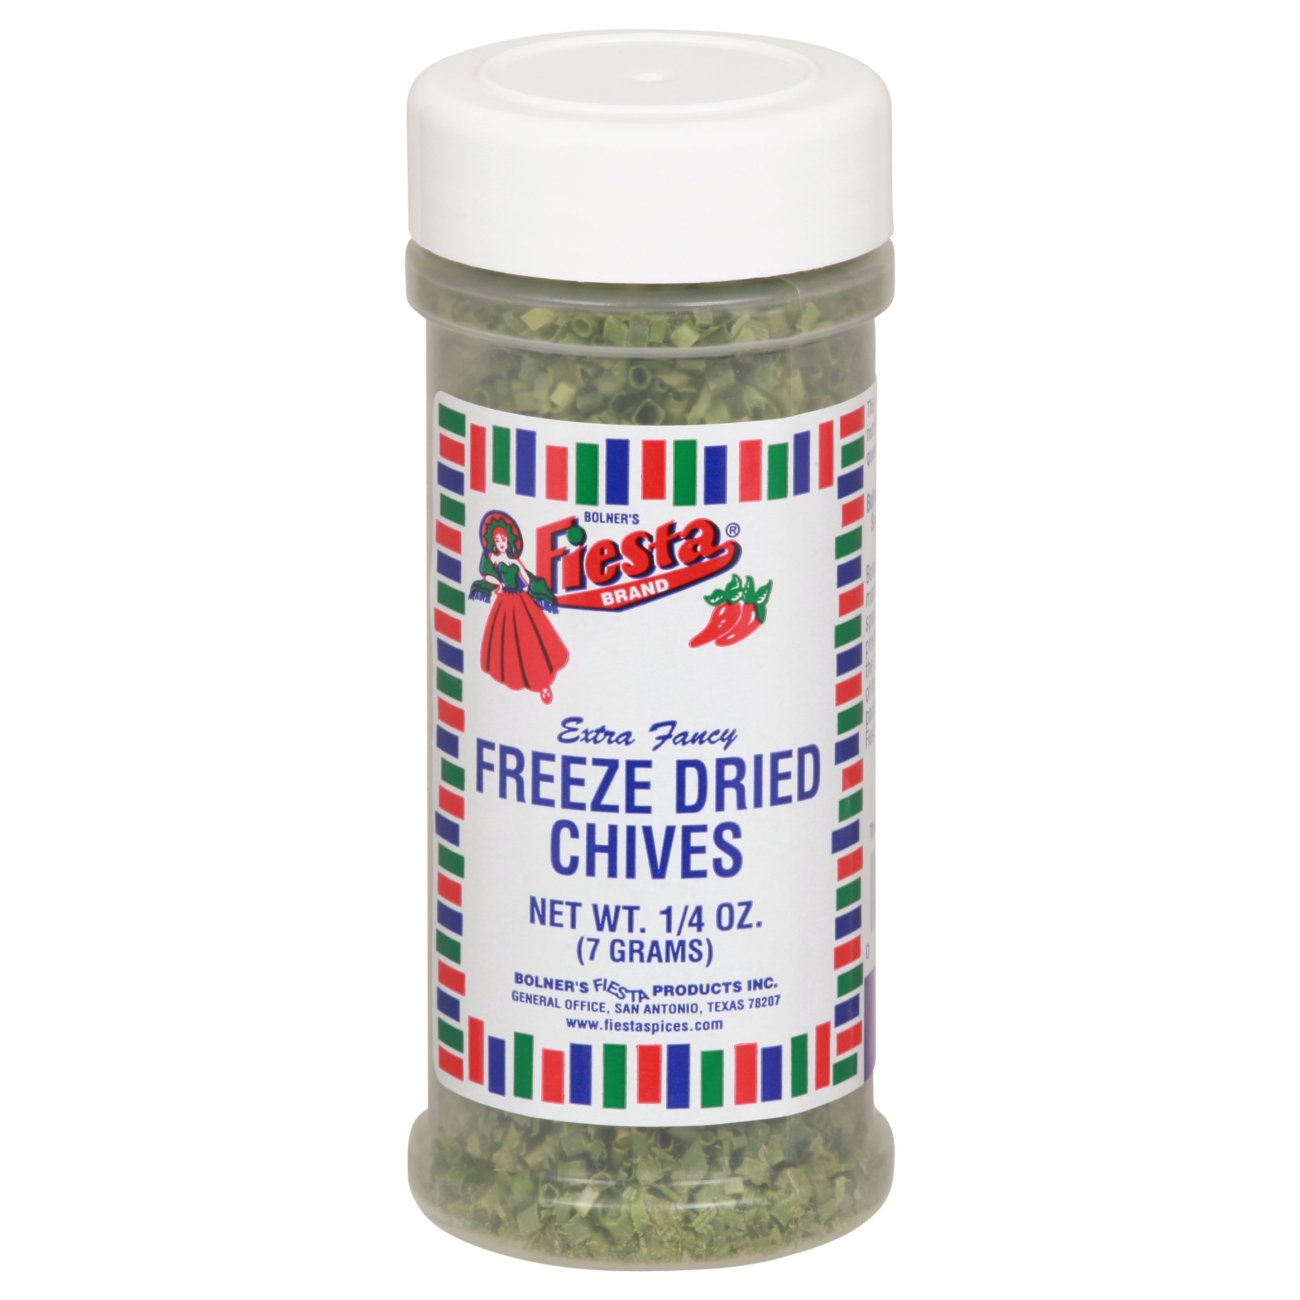 Bolner's Fiesta Freeze Dried Chives - Shop Herbs & Spices at H-E-B